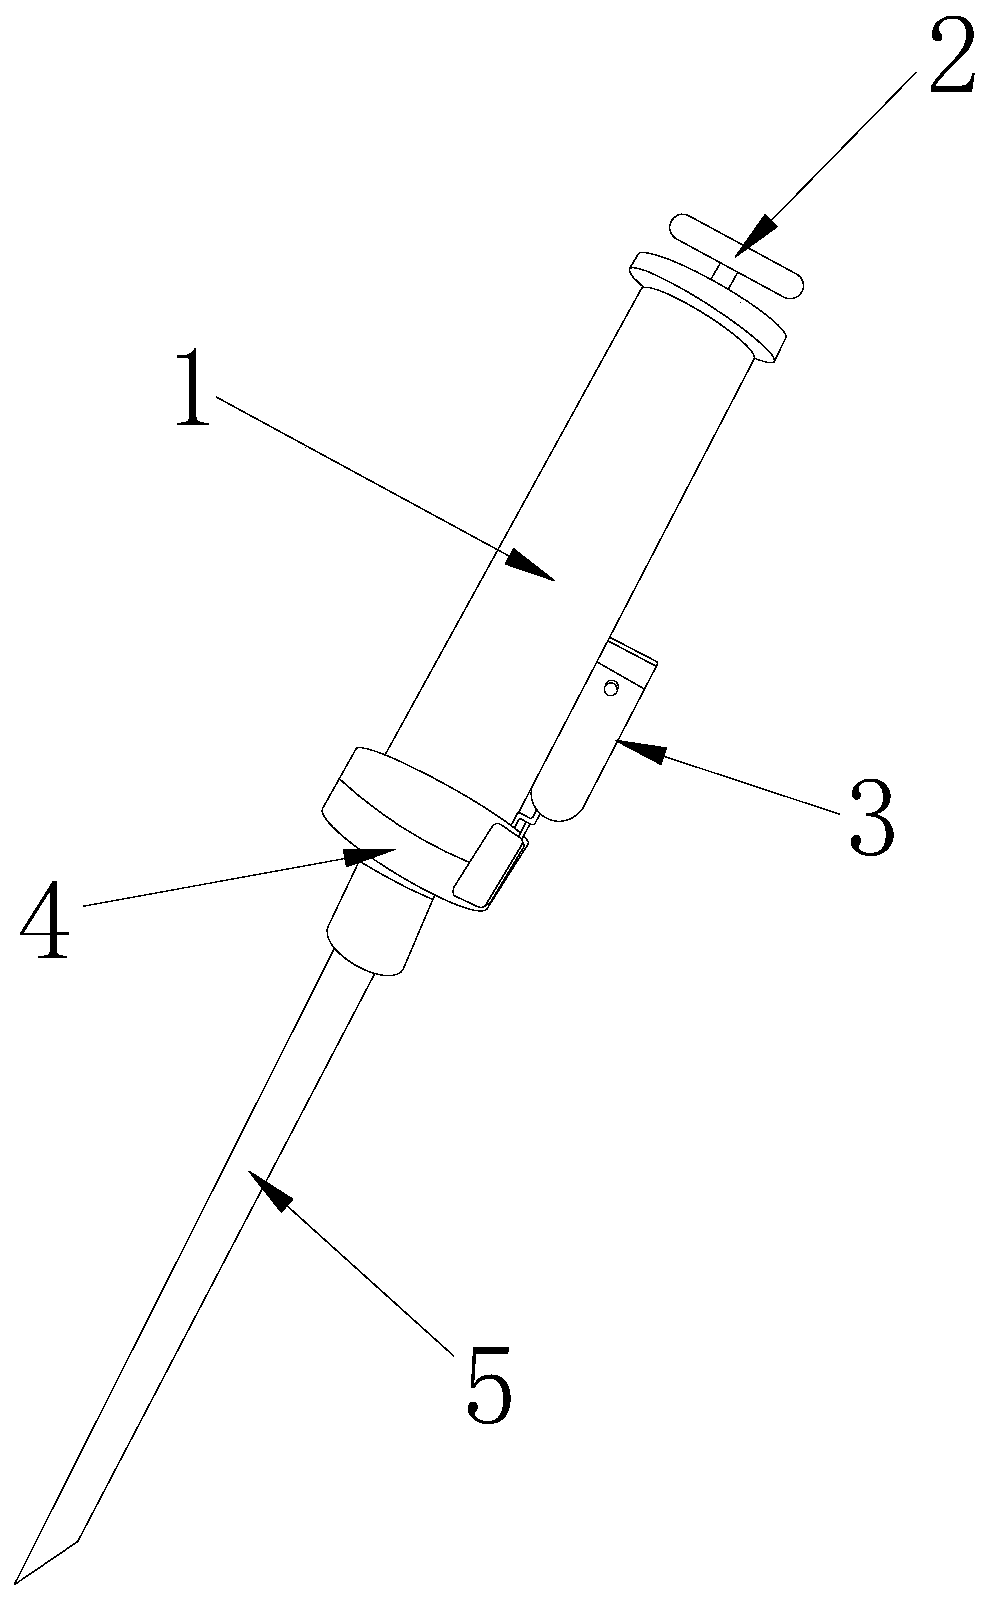 Sampling device for bioreactor used for removing residual water